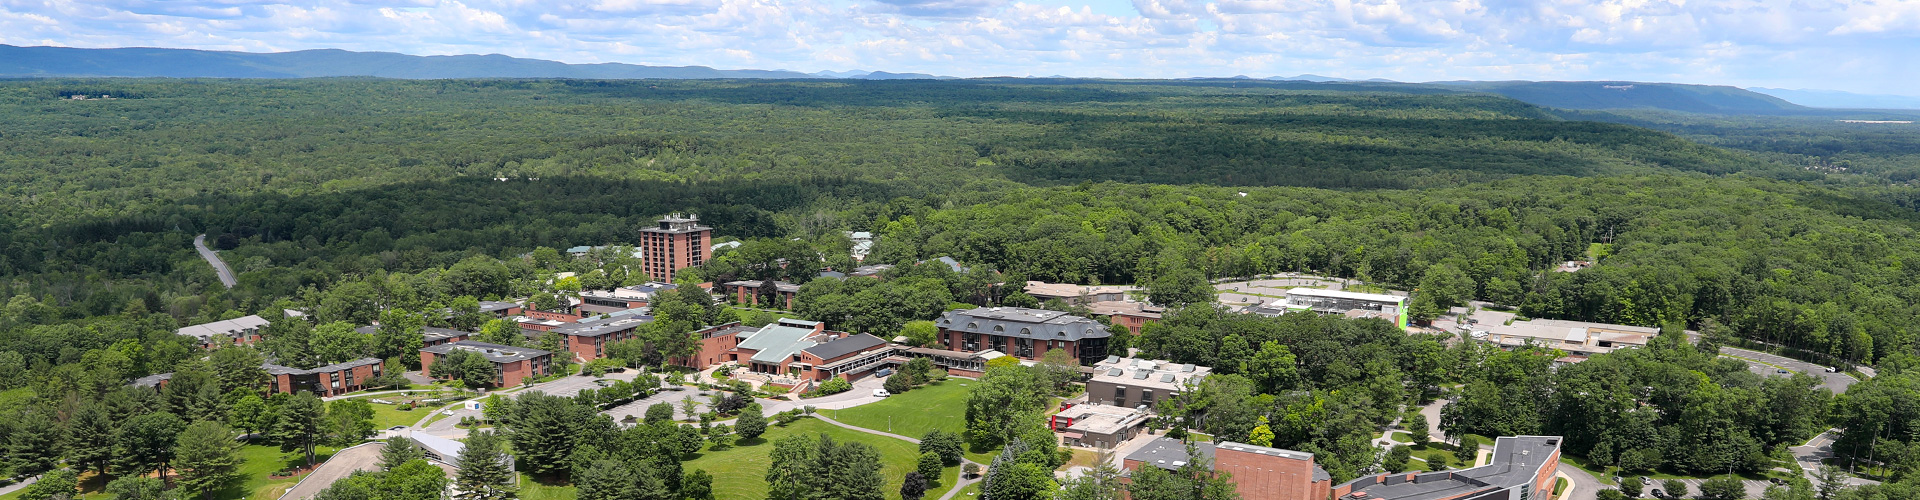 aerial view over a college campus surrounded by woods